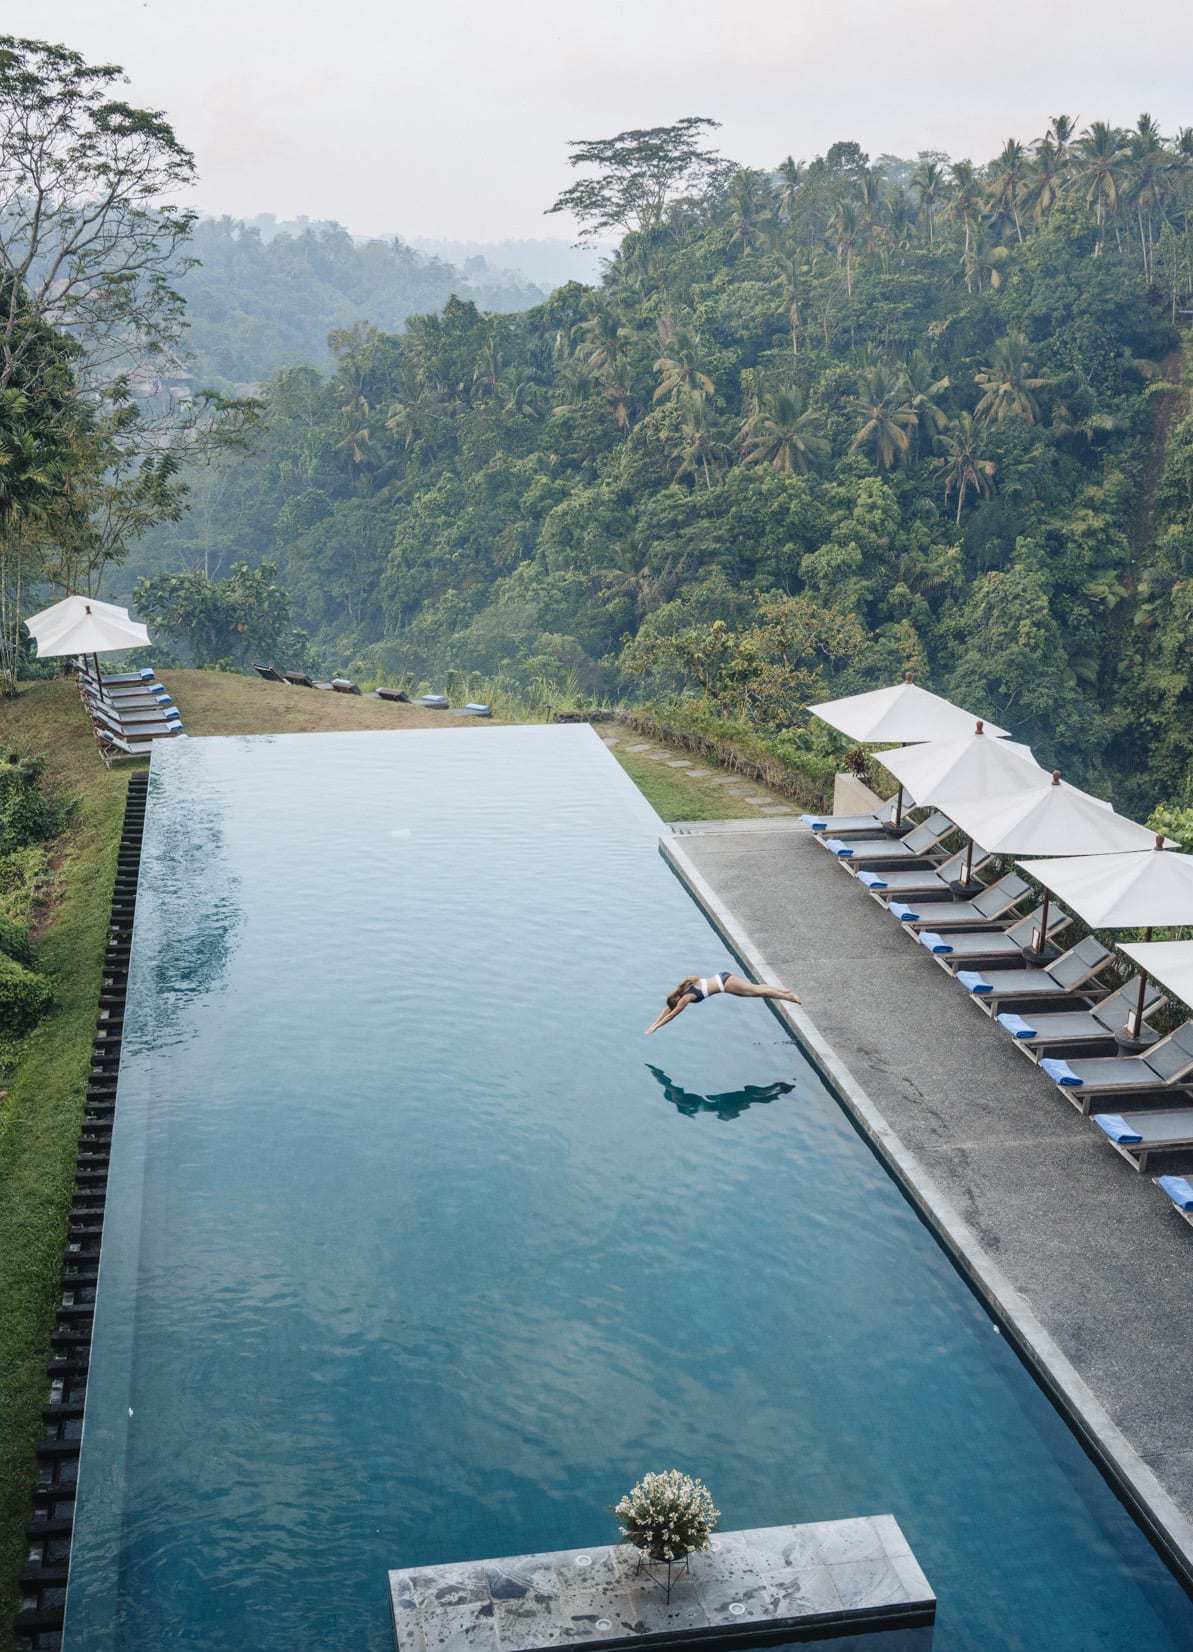 Staying at the Alila Ubud in Bali, Indonesia